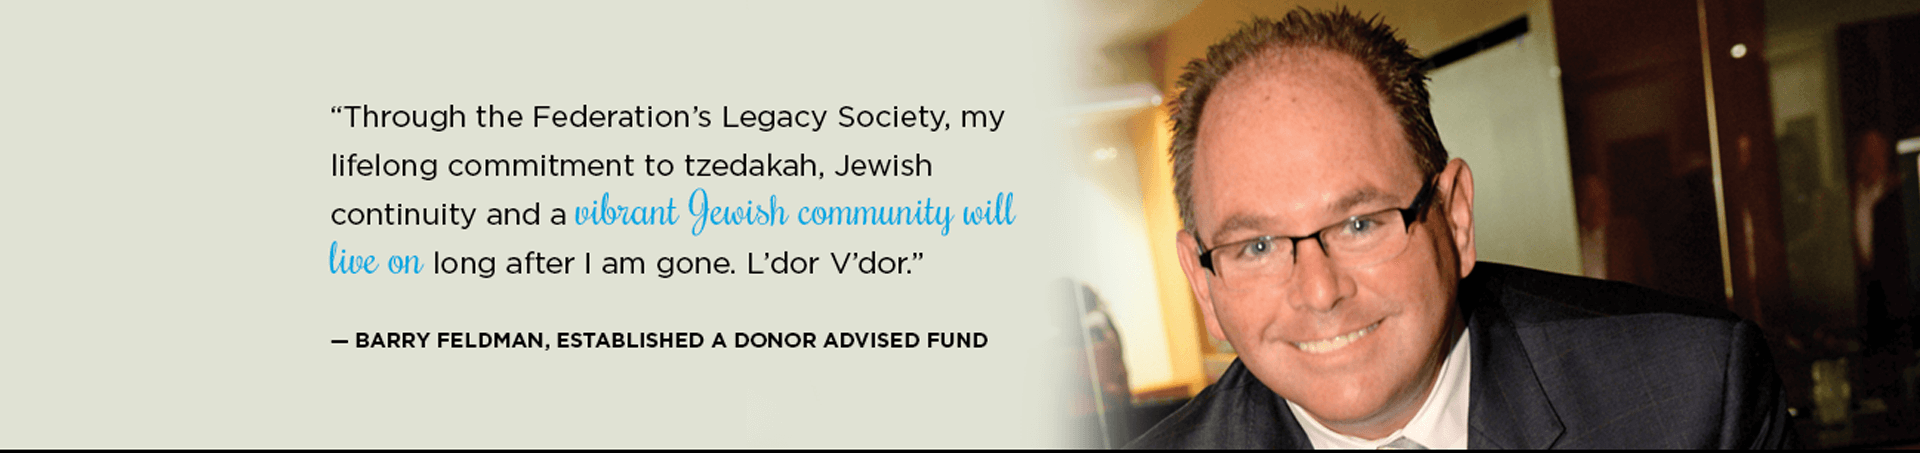 "Through the Federation's Legacy Society, my lifelong commitment to tzedakah, Jewish continuity and a vibrant Jewish community will live on long after I am gone. L'dor V'dor" - Barry Feldman, Established a Donor Advised Fund